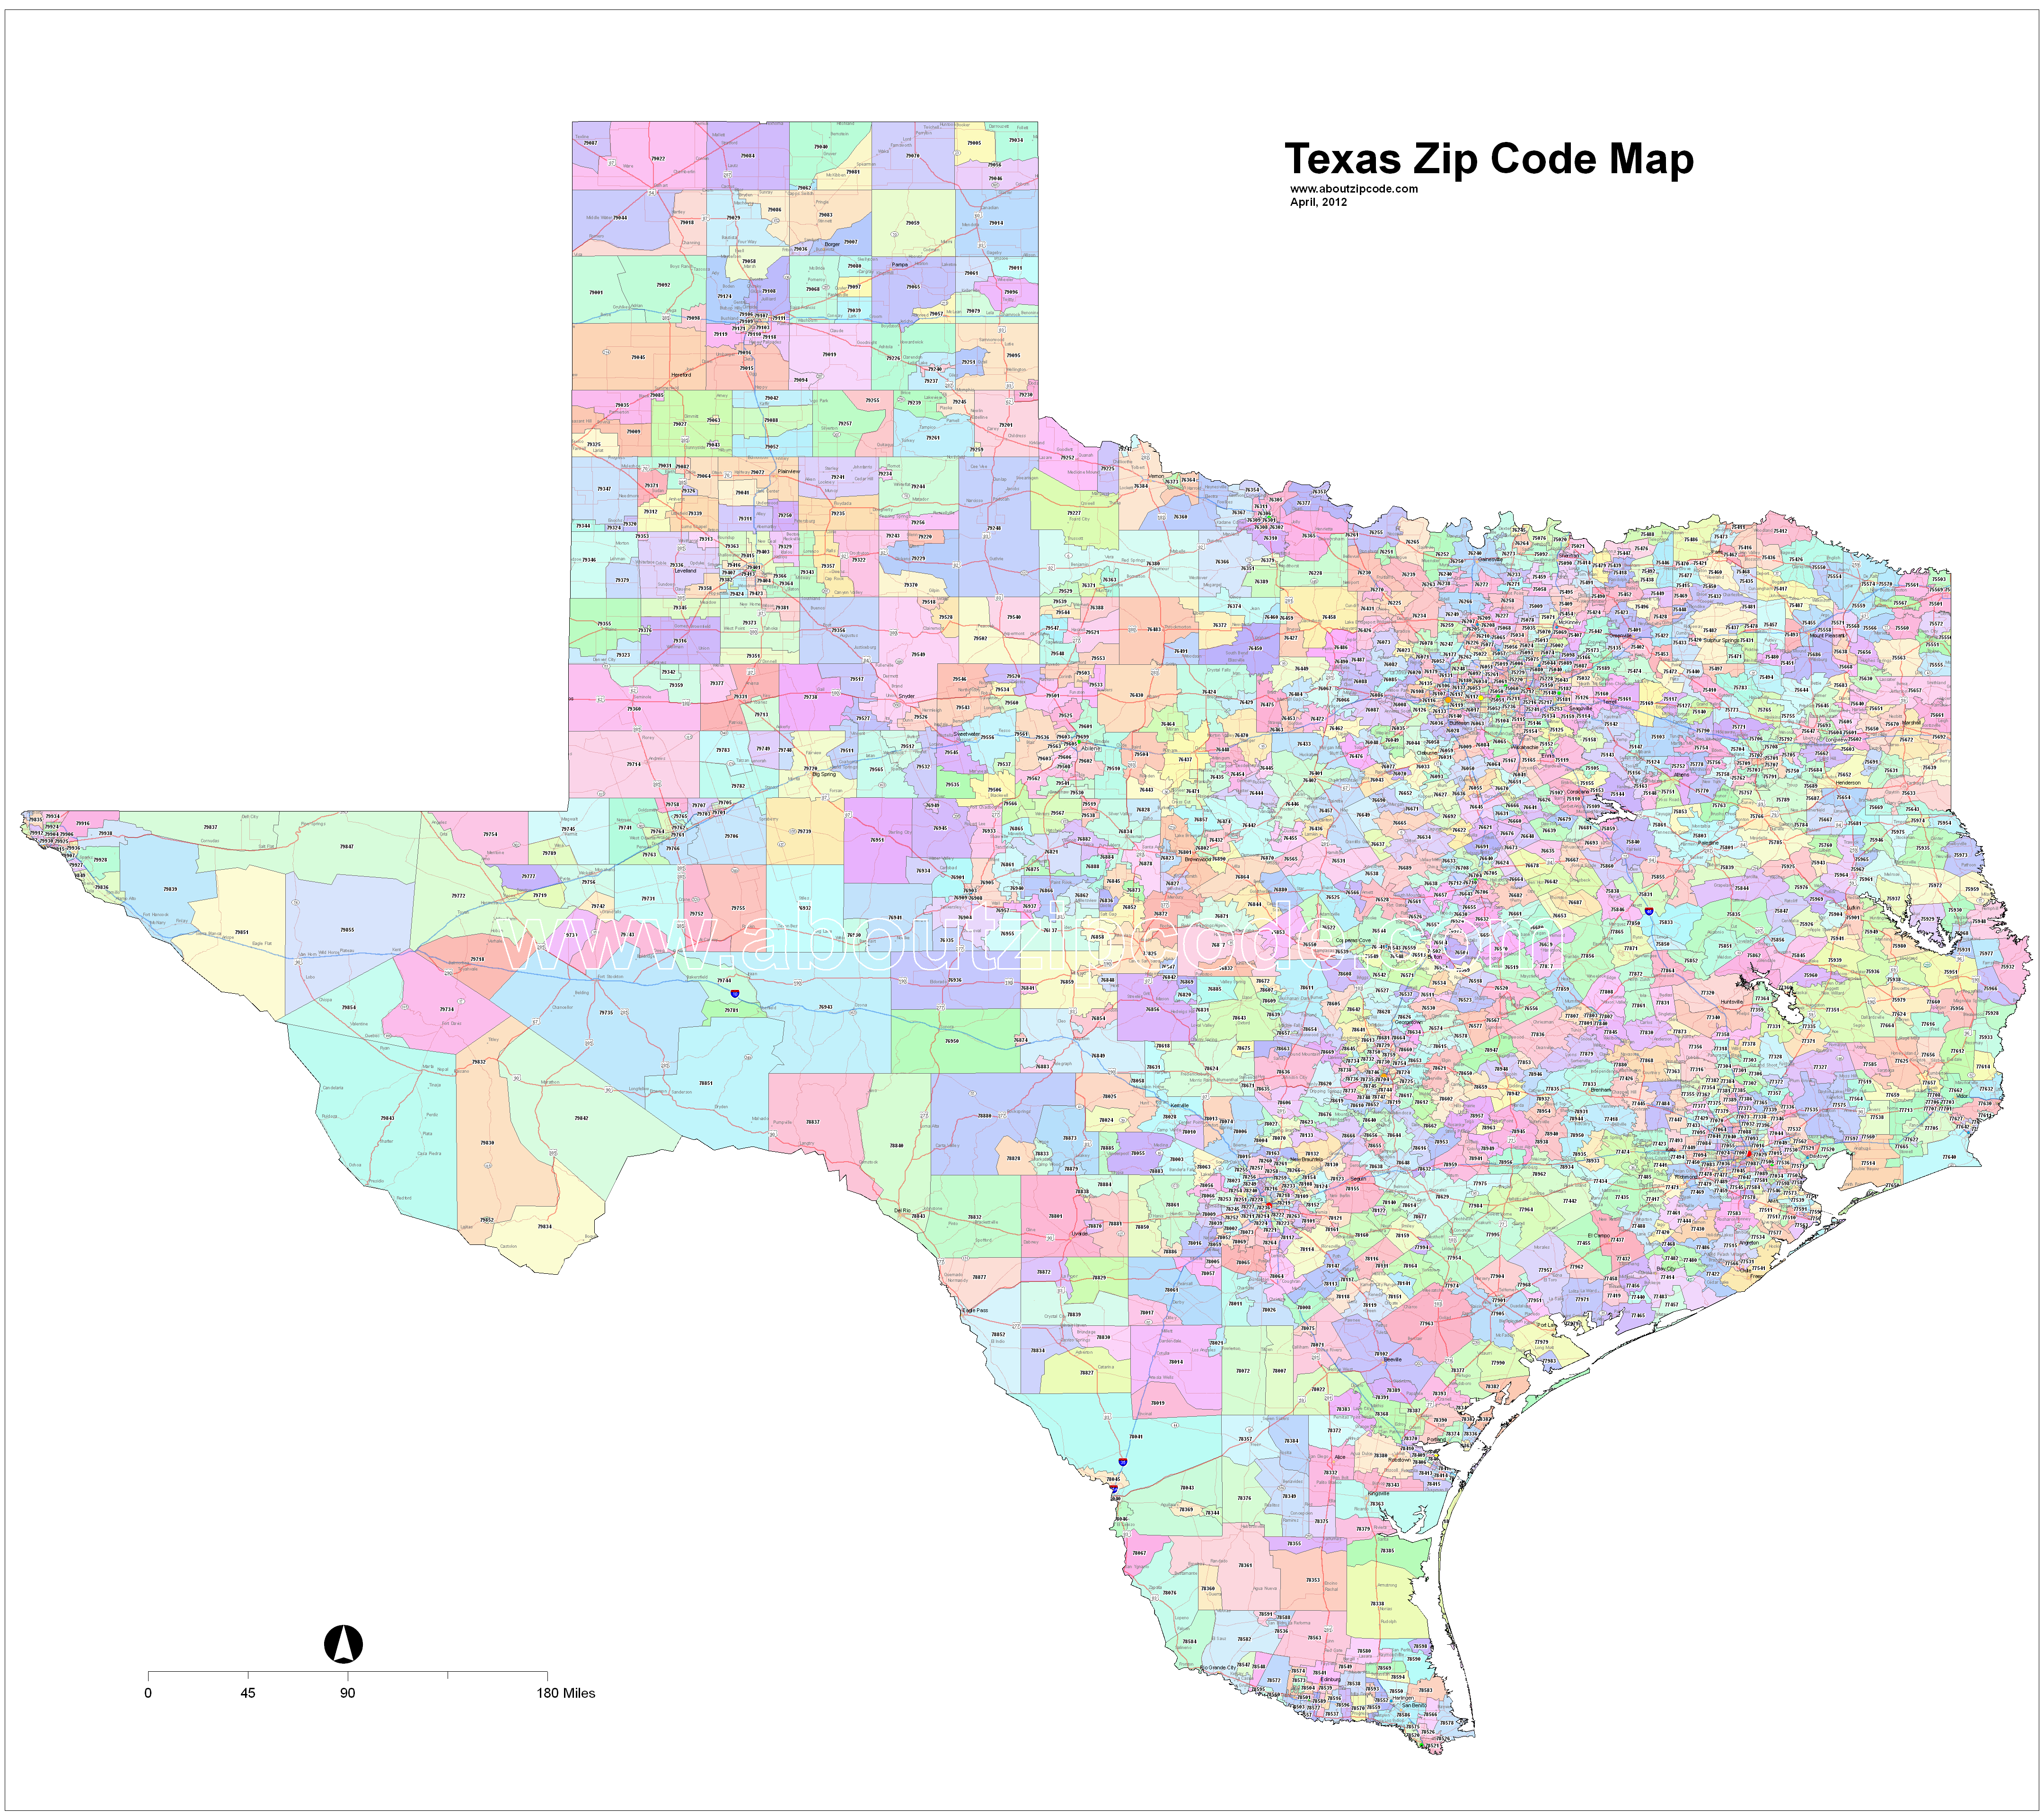 Texas Zip Code Maps - Free Texas Zip Code Maps - Full Map Of Texas